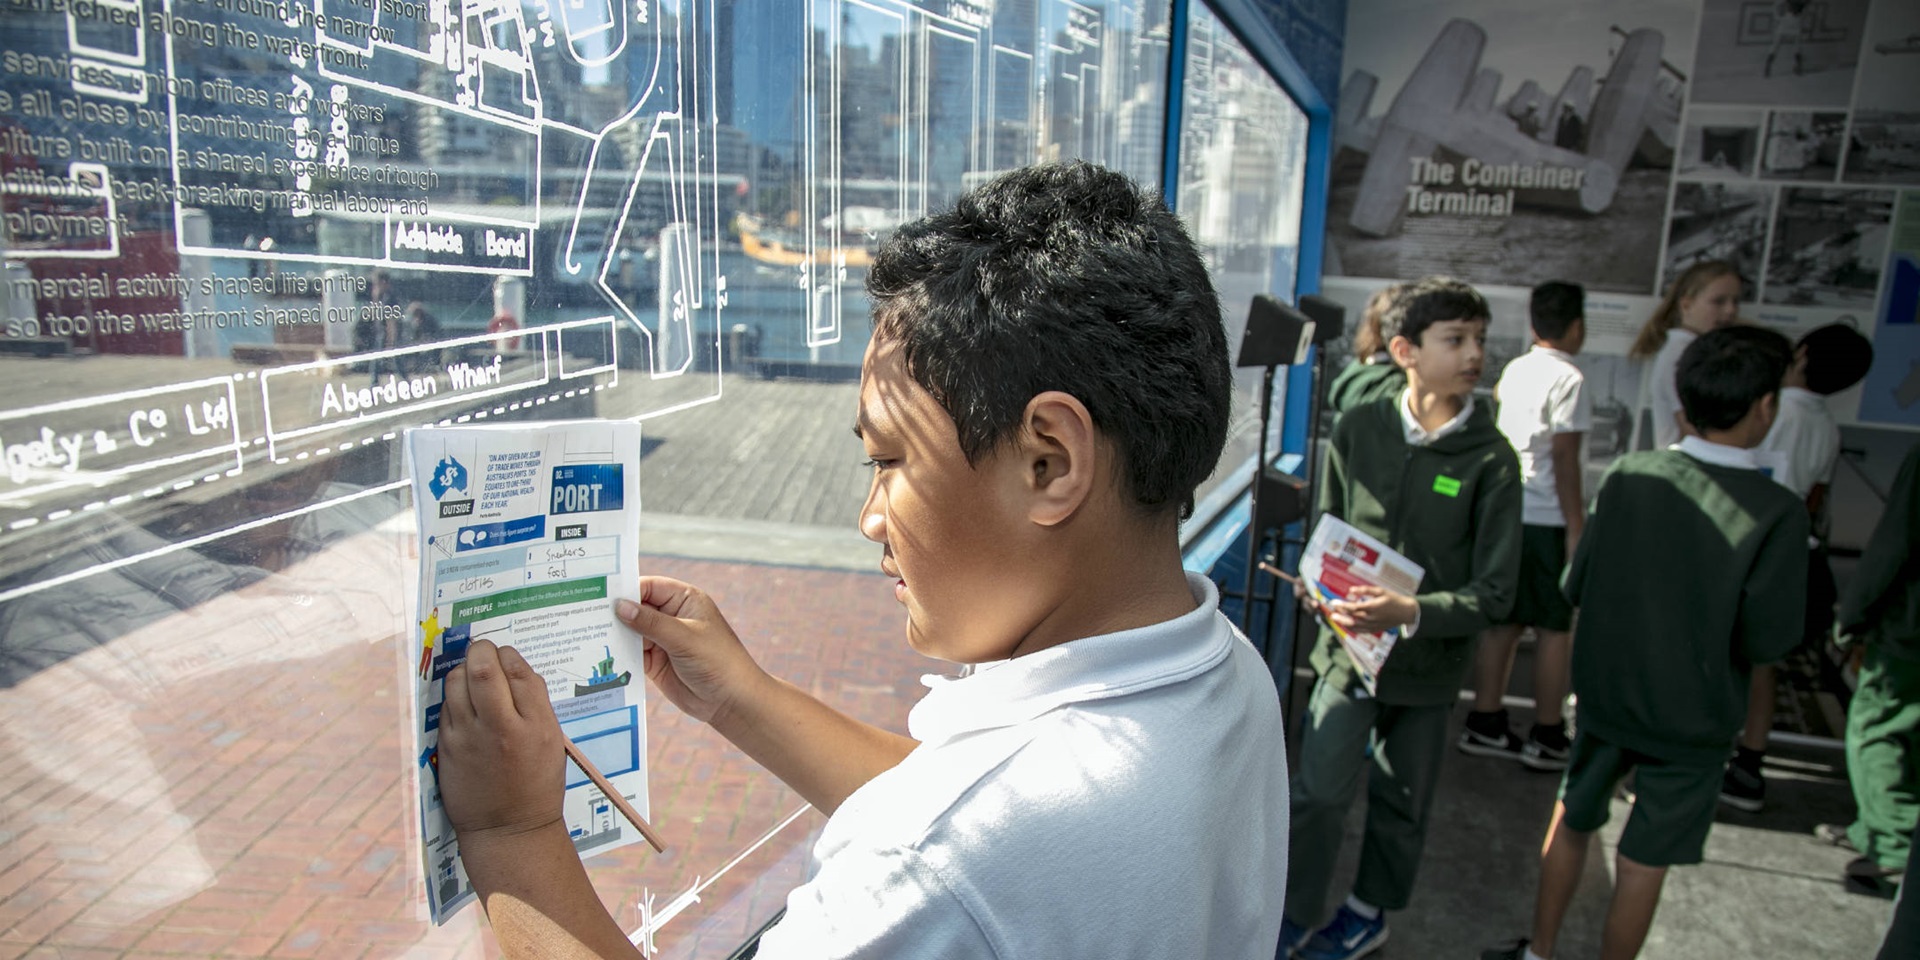 Exhibition education program. School kids visiting the 'Container' exhibition, Wharf side, ANMM, August 2018